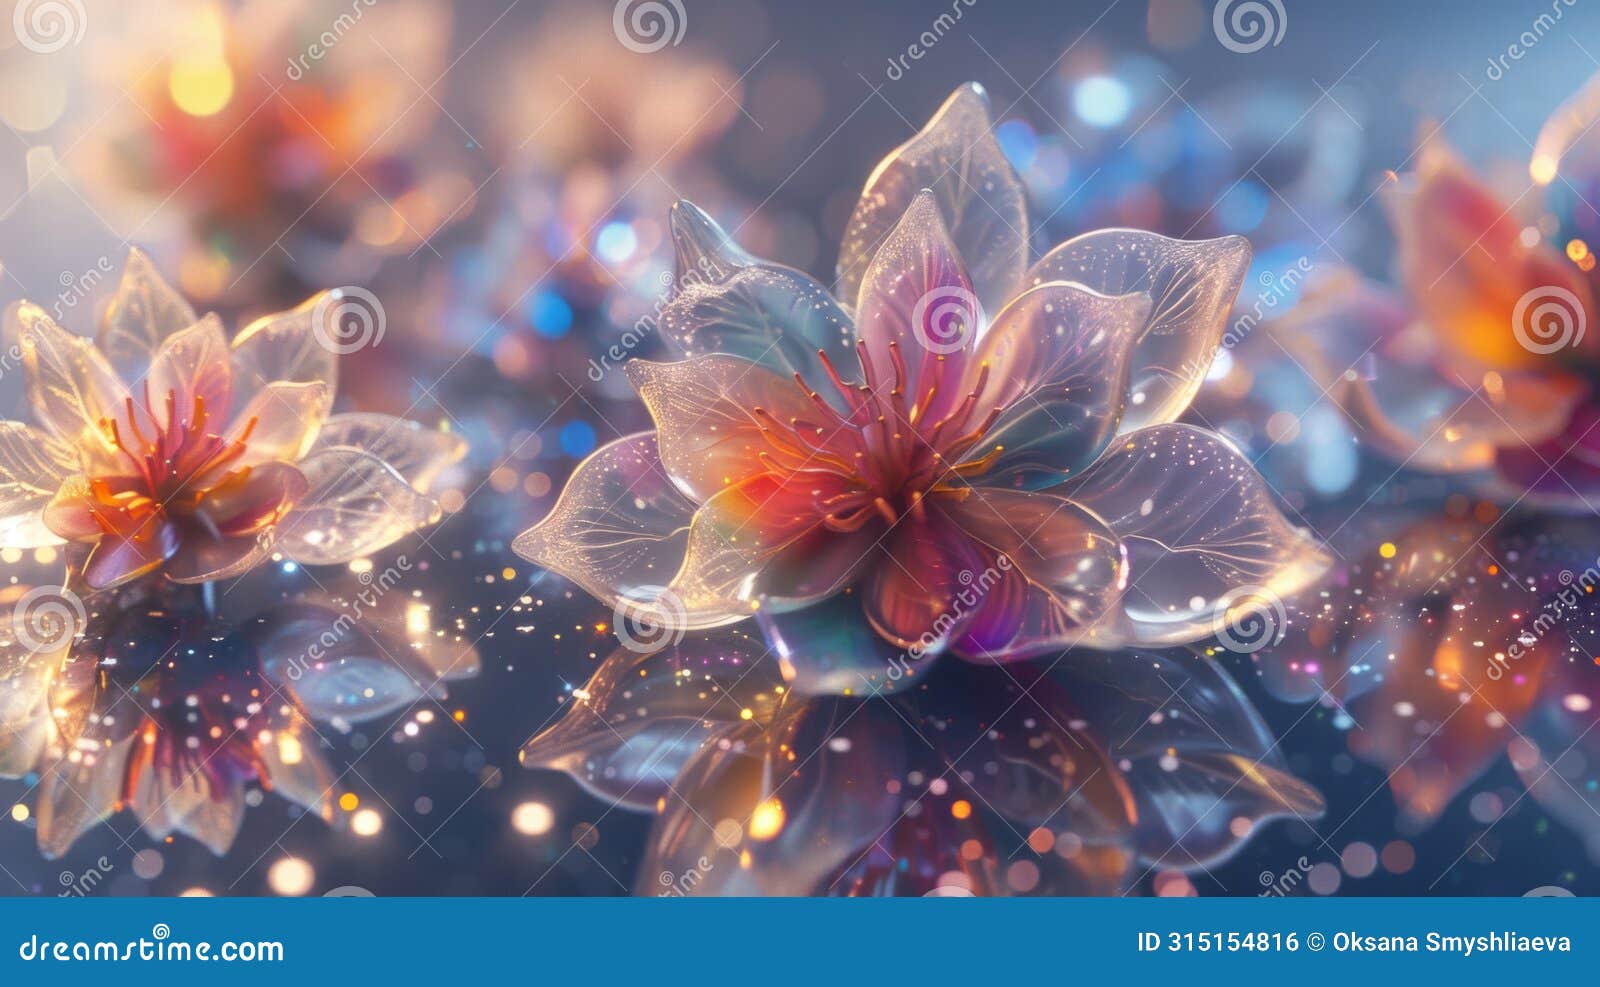 ethereal glow: surreal digital art of luminescent flowers